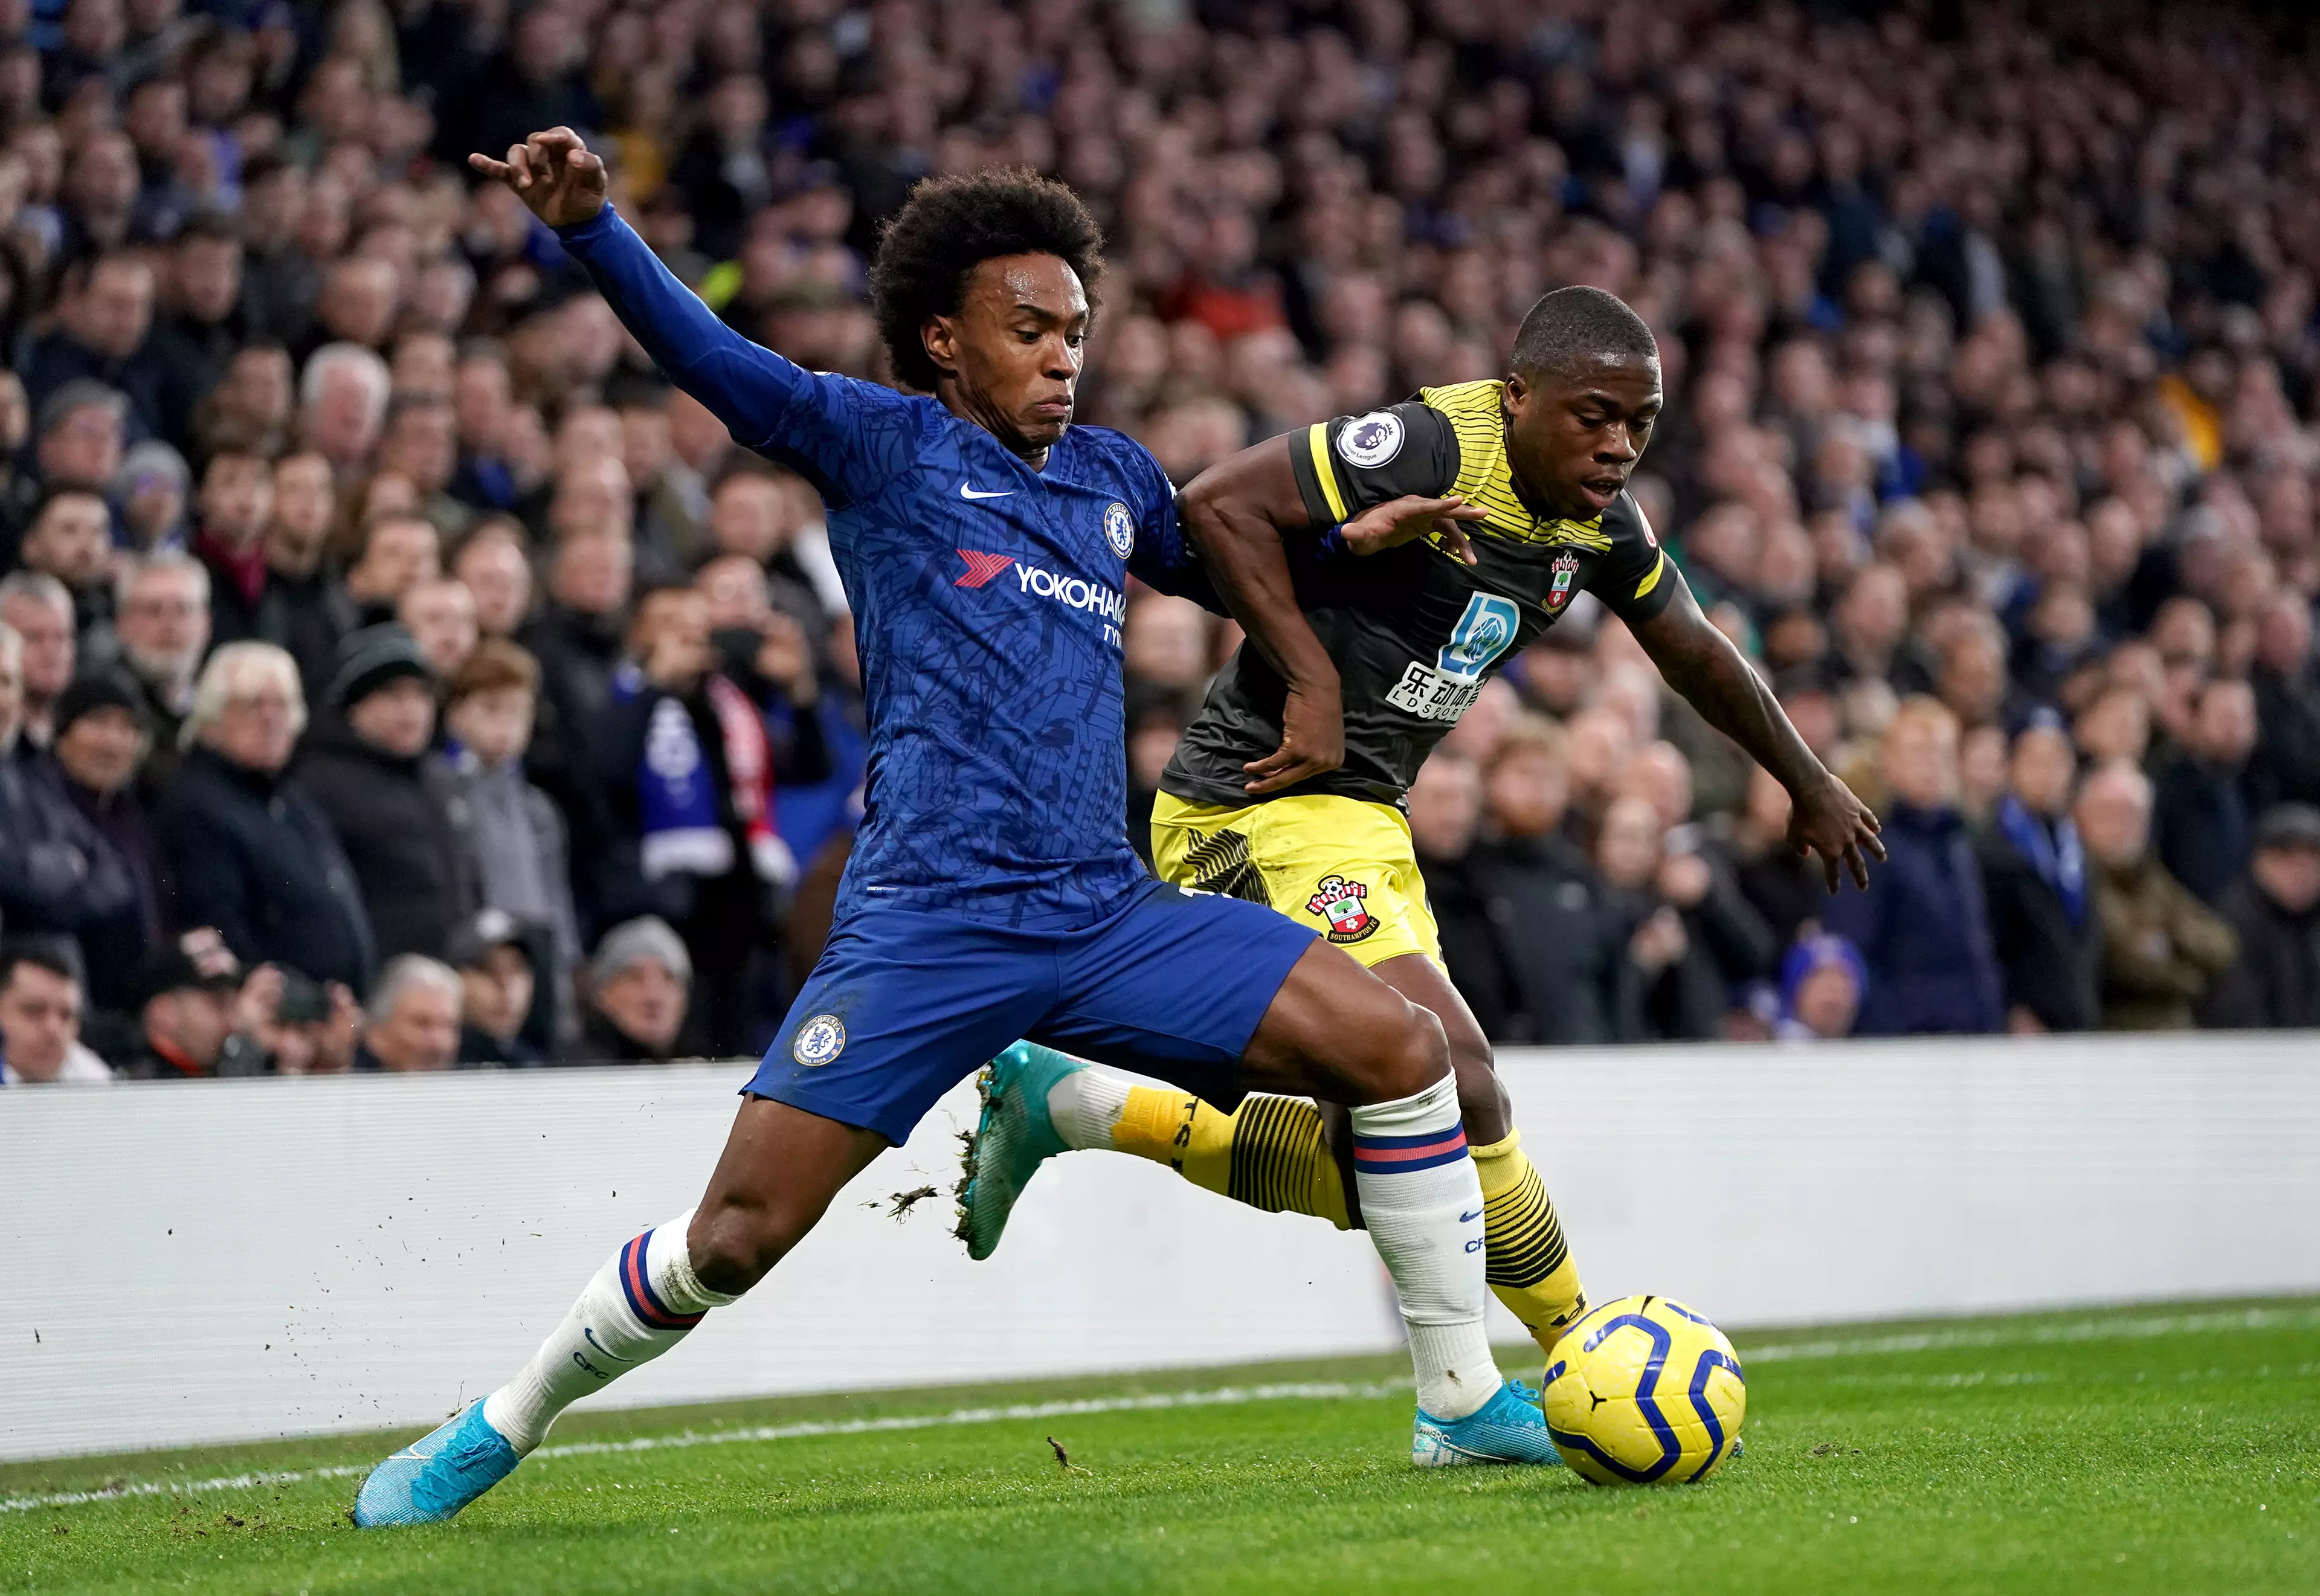 Chelsea's Willian is also out of contract in the summer